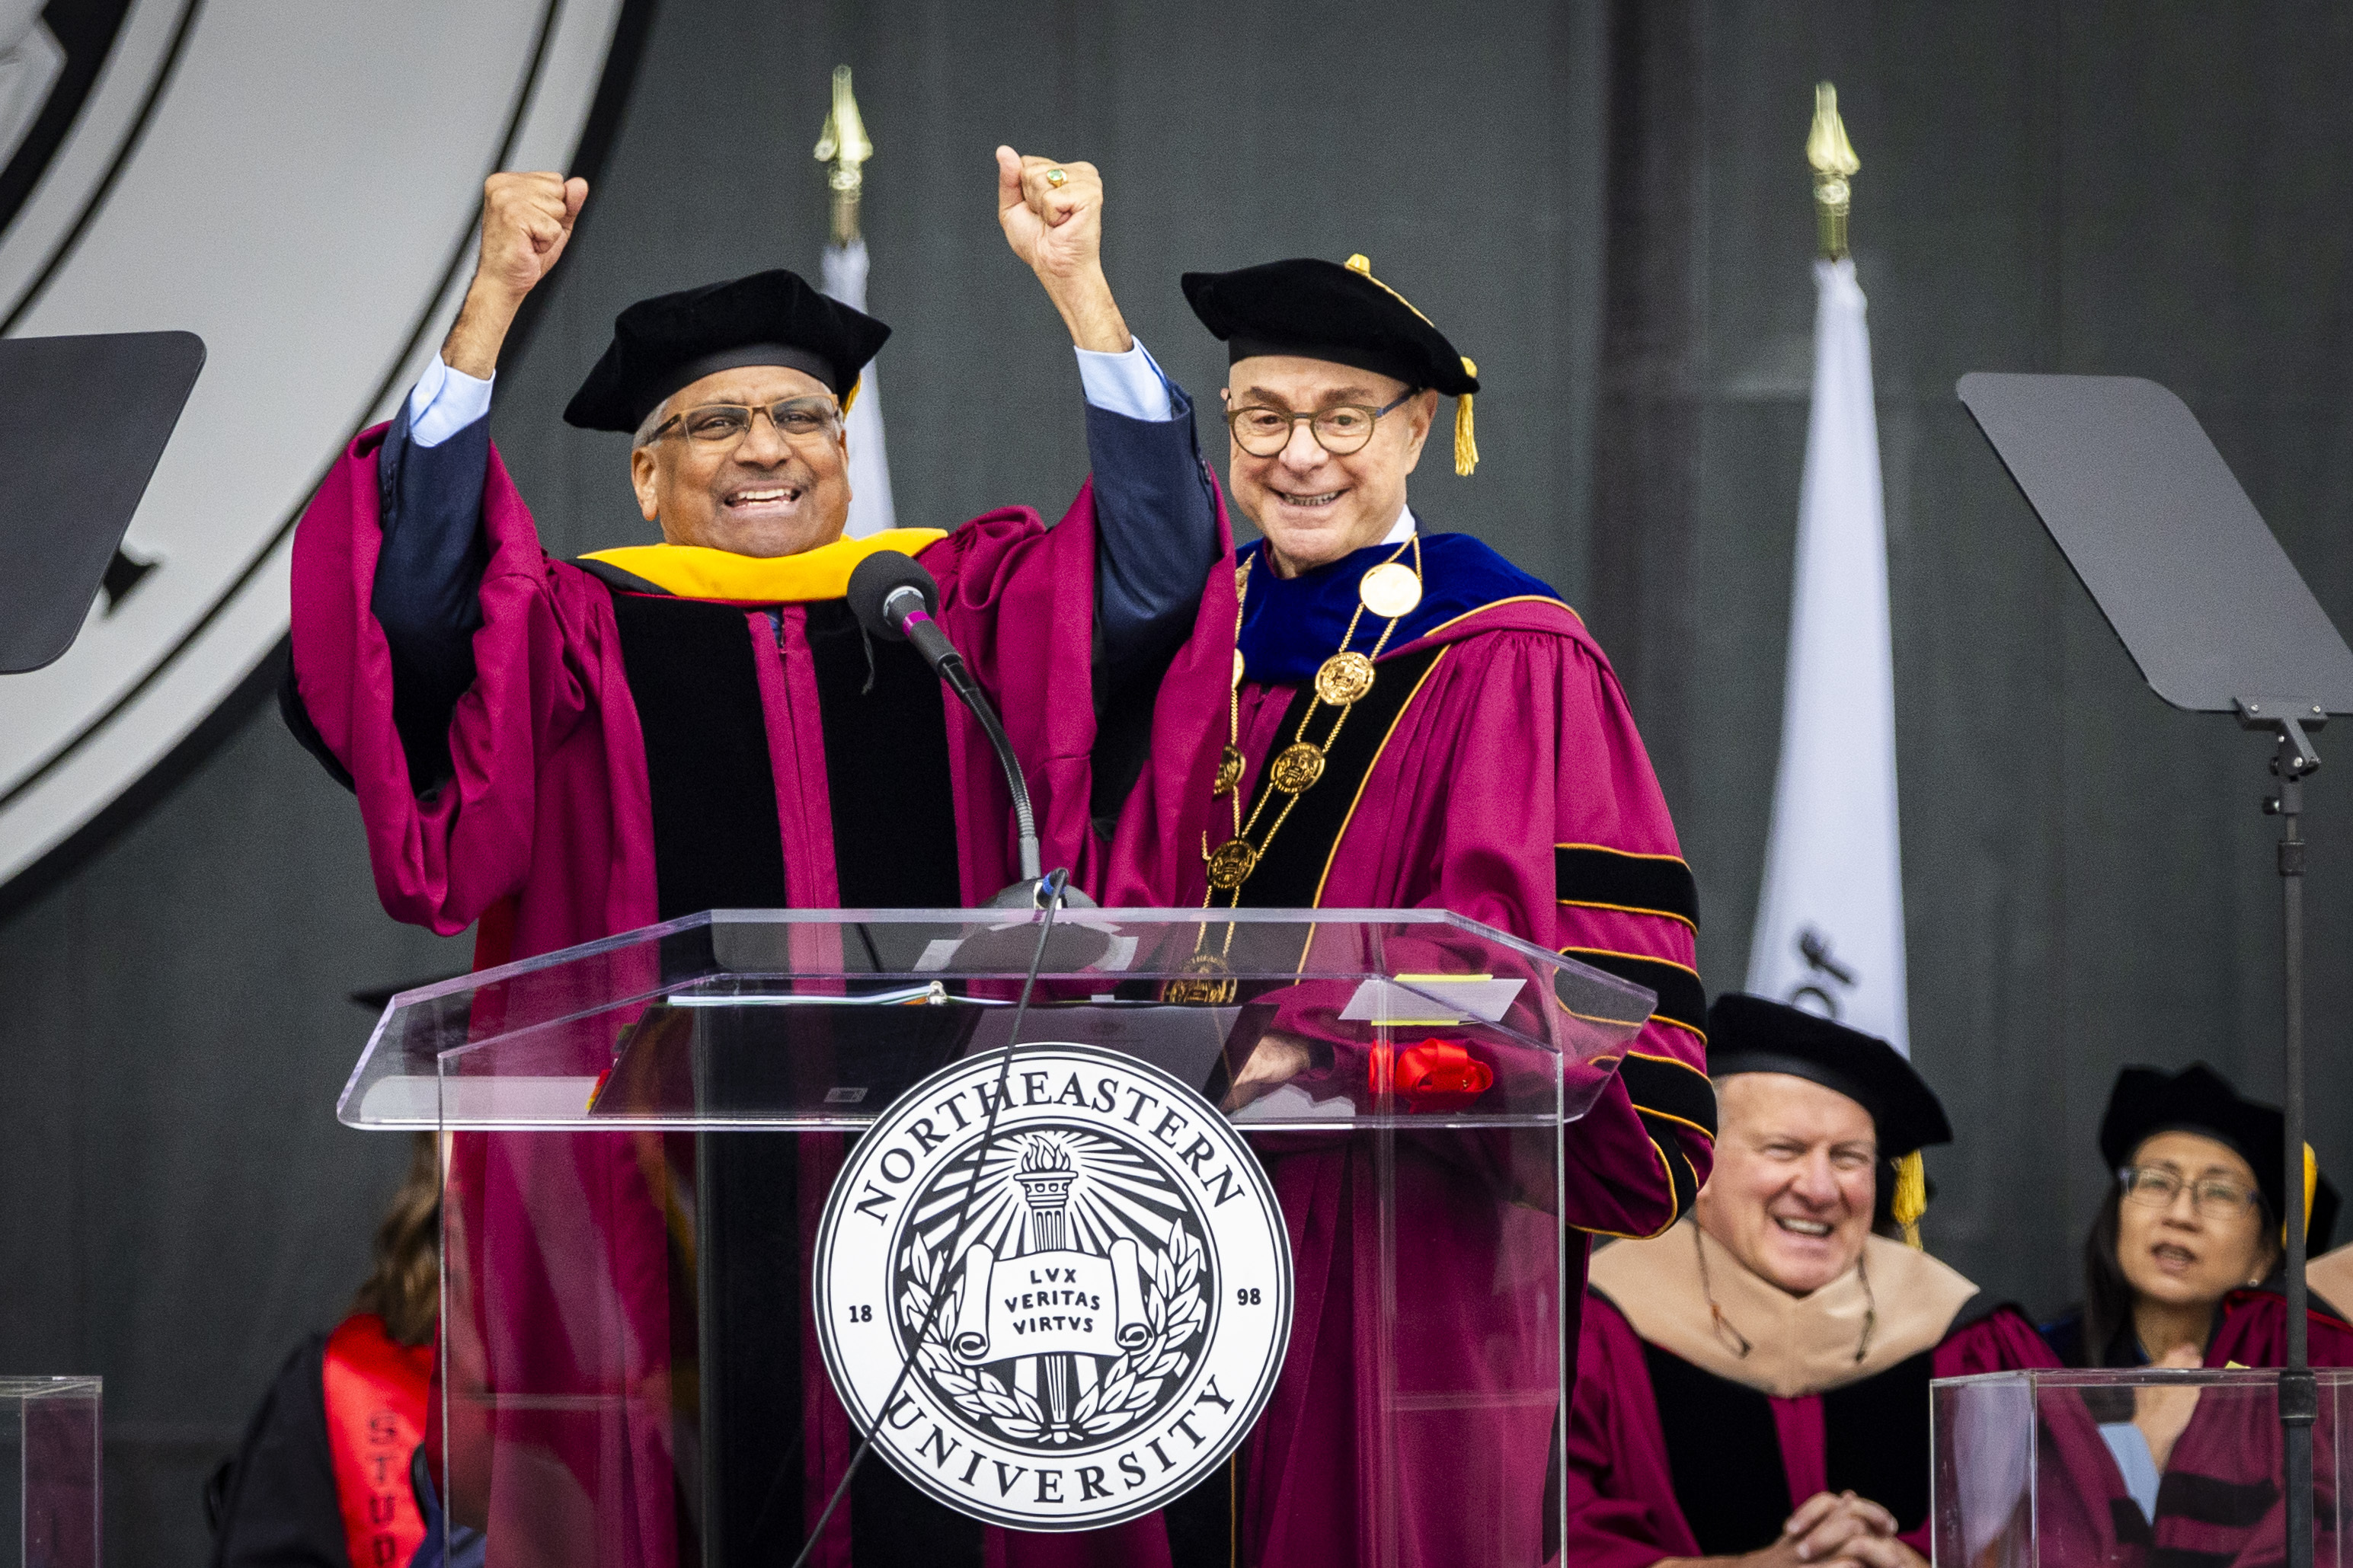 Panchanathan with his fists raised standing next to President Aoun on stage at commencement.